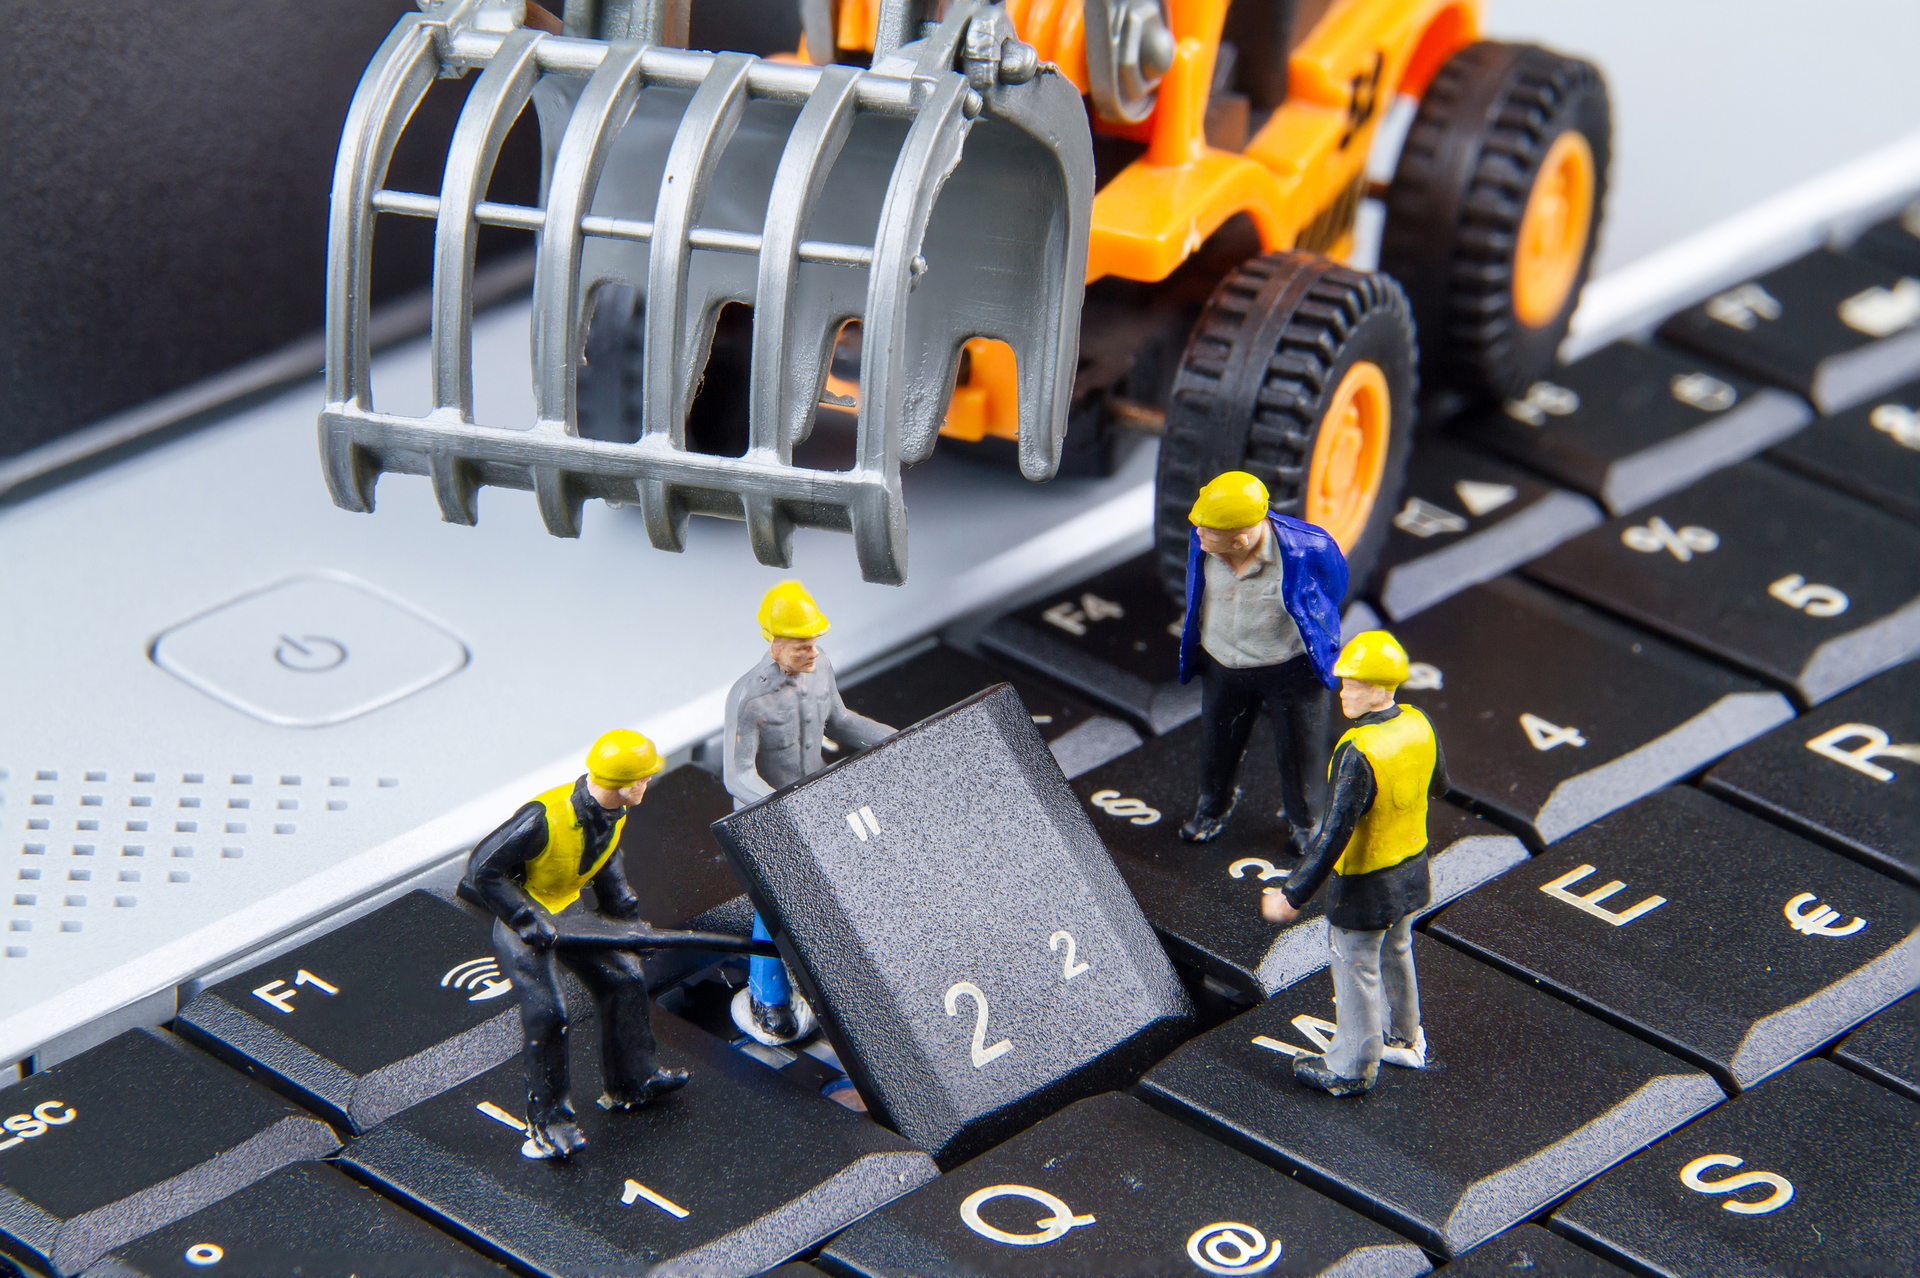 Repairing laptop with little workmen funny picture